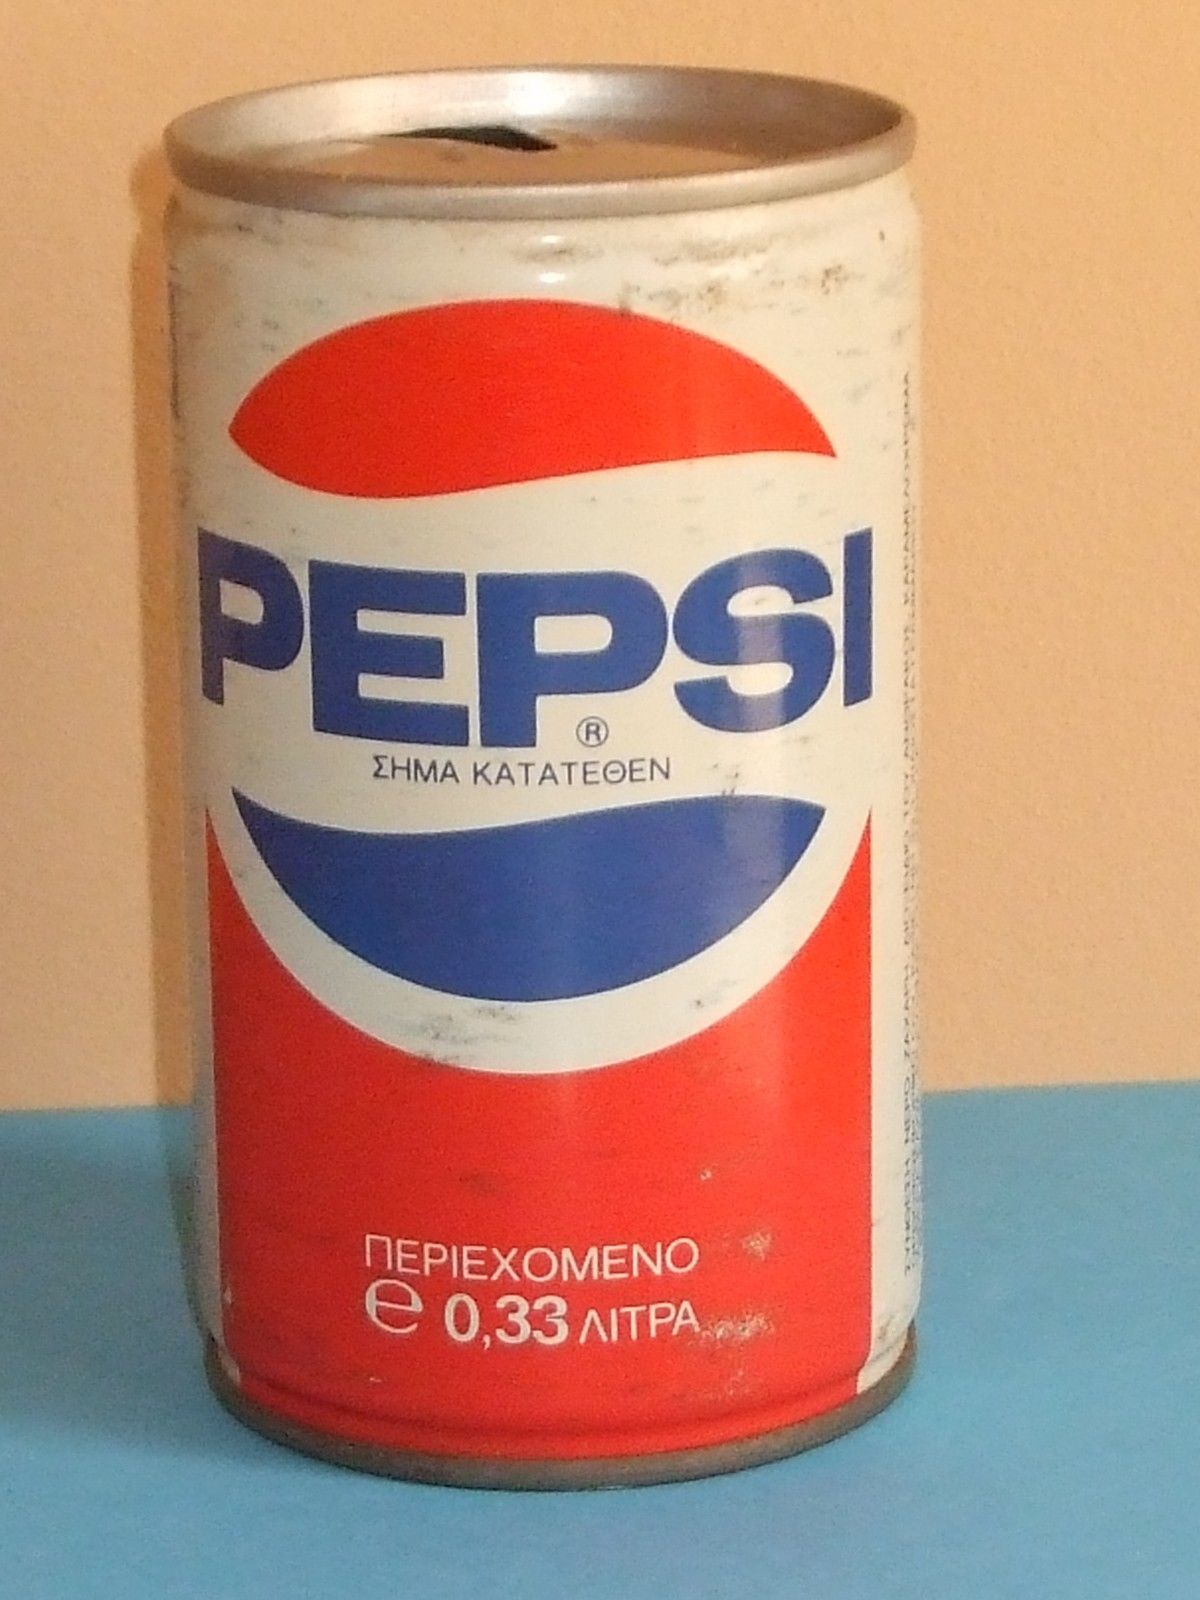 Firestorm Pepsi Can from Greece 1982